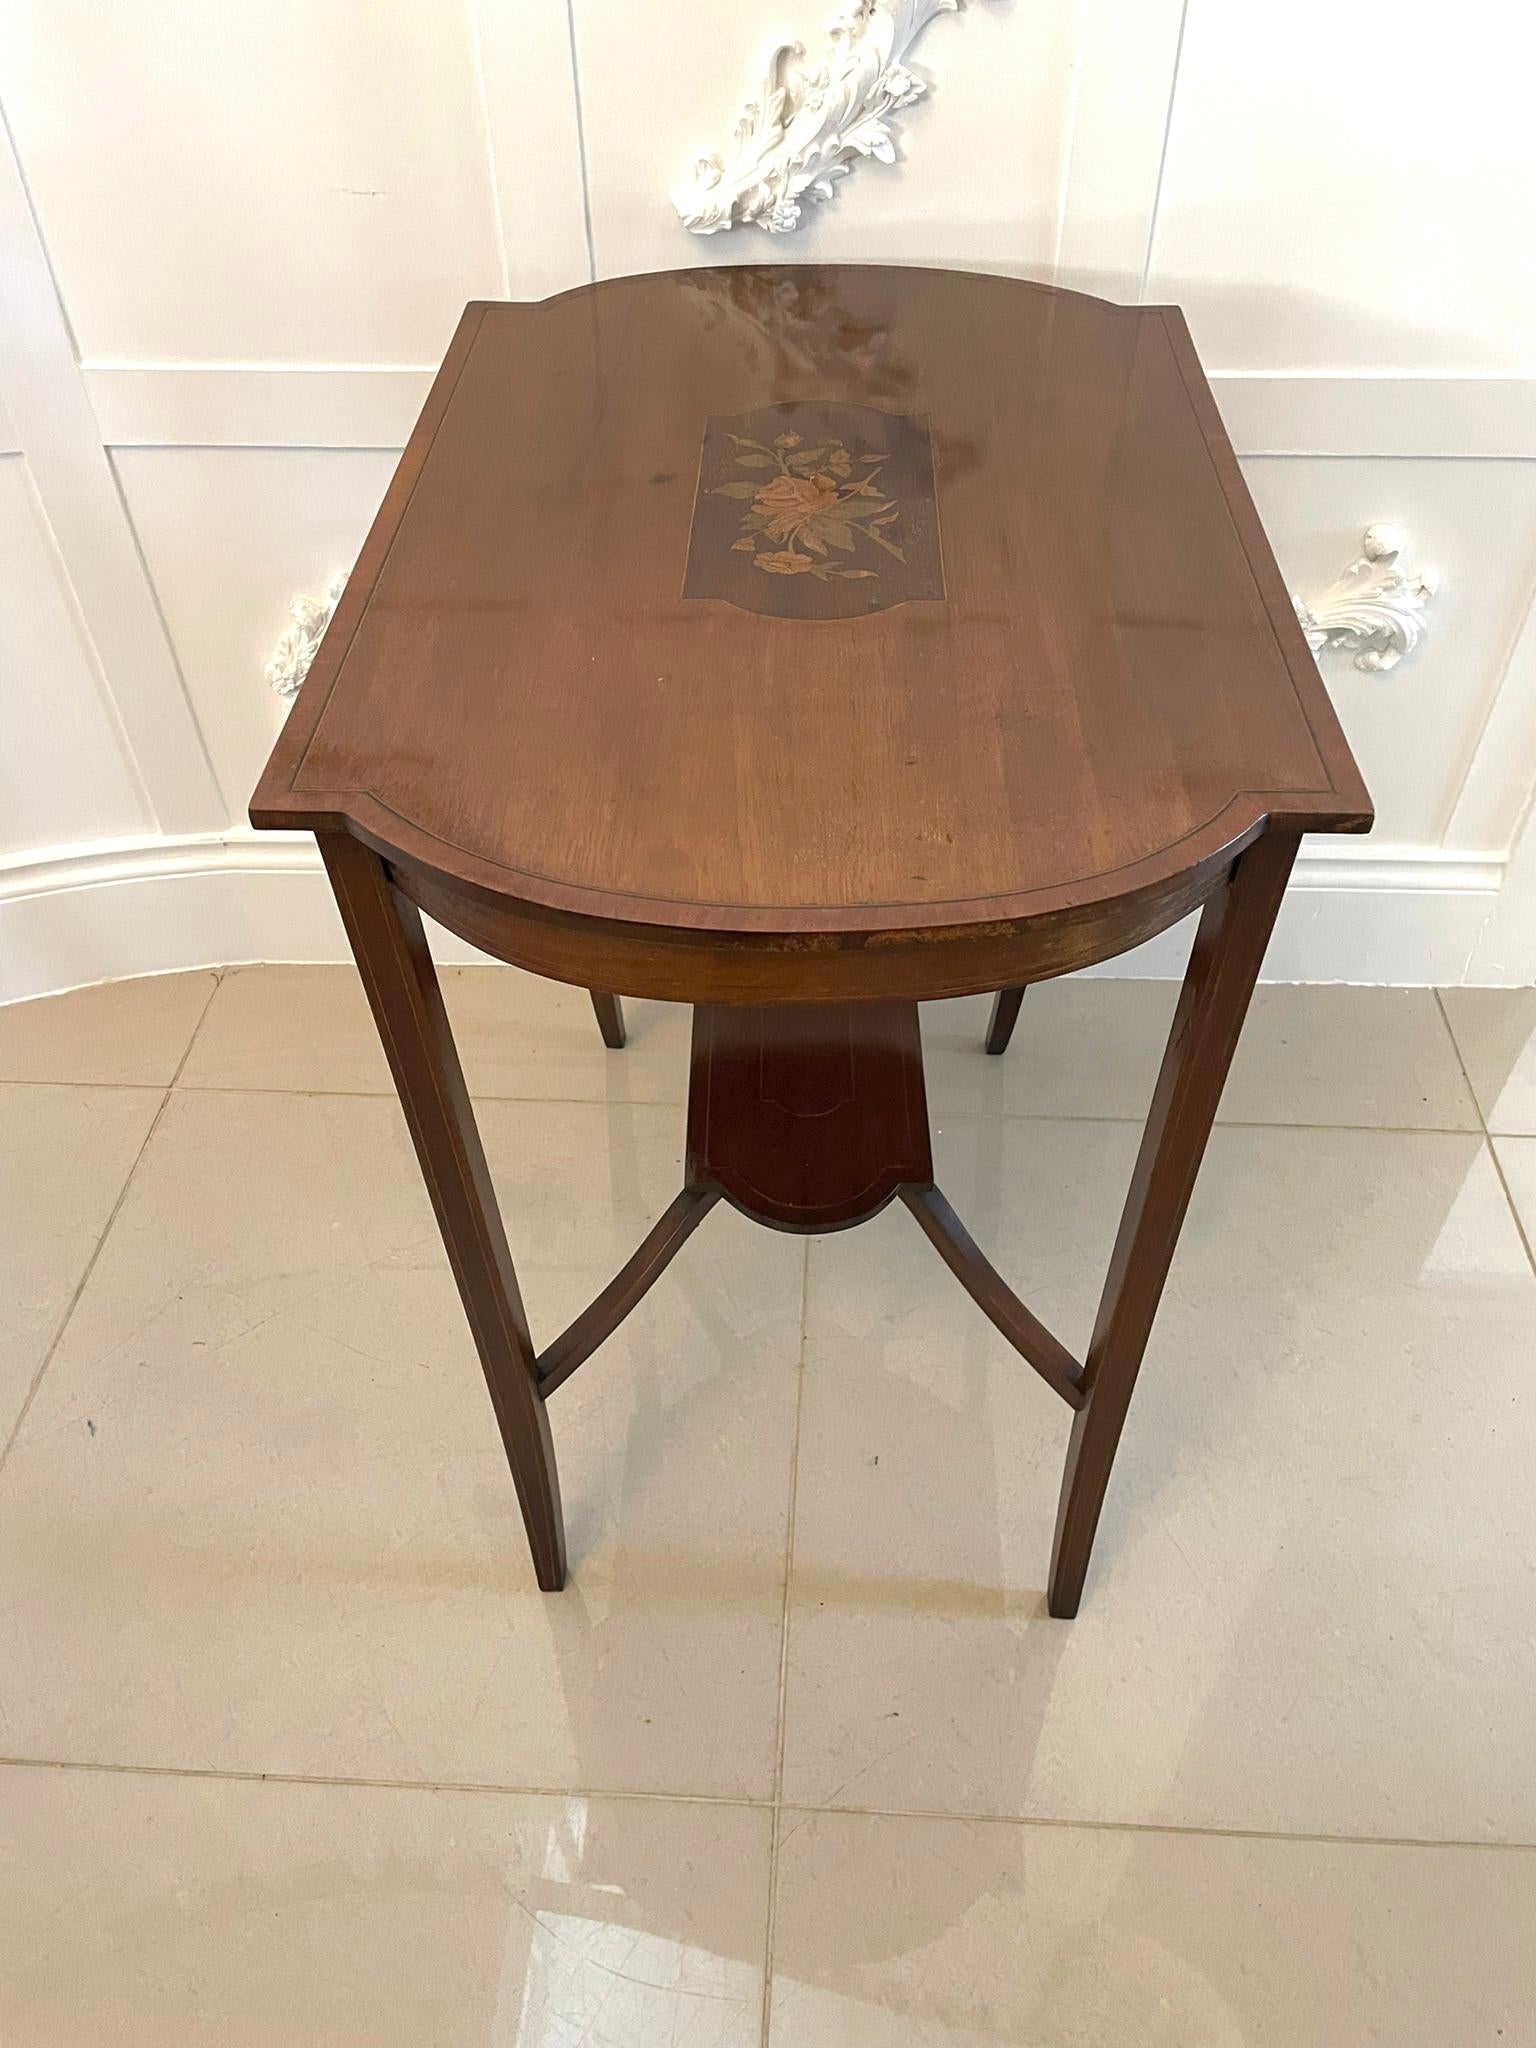 Antique Edwardian Quality Mahogany Inlaid Lamp Table In Good Condition For Sale In Suffolk, GB